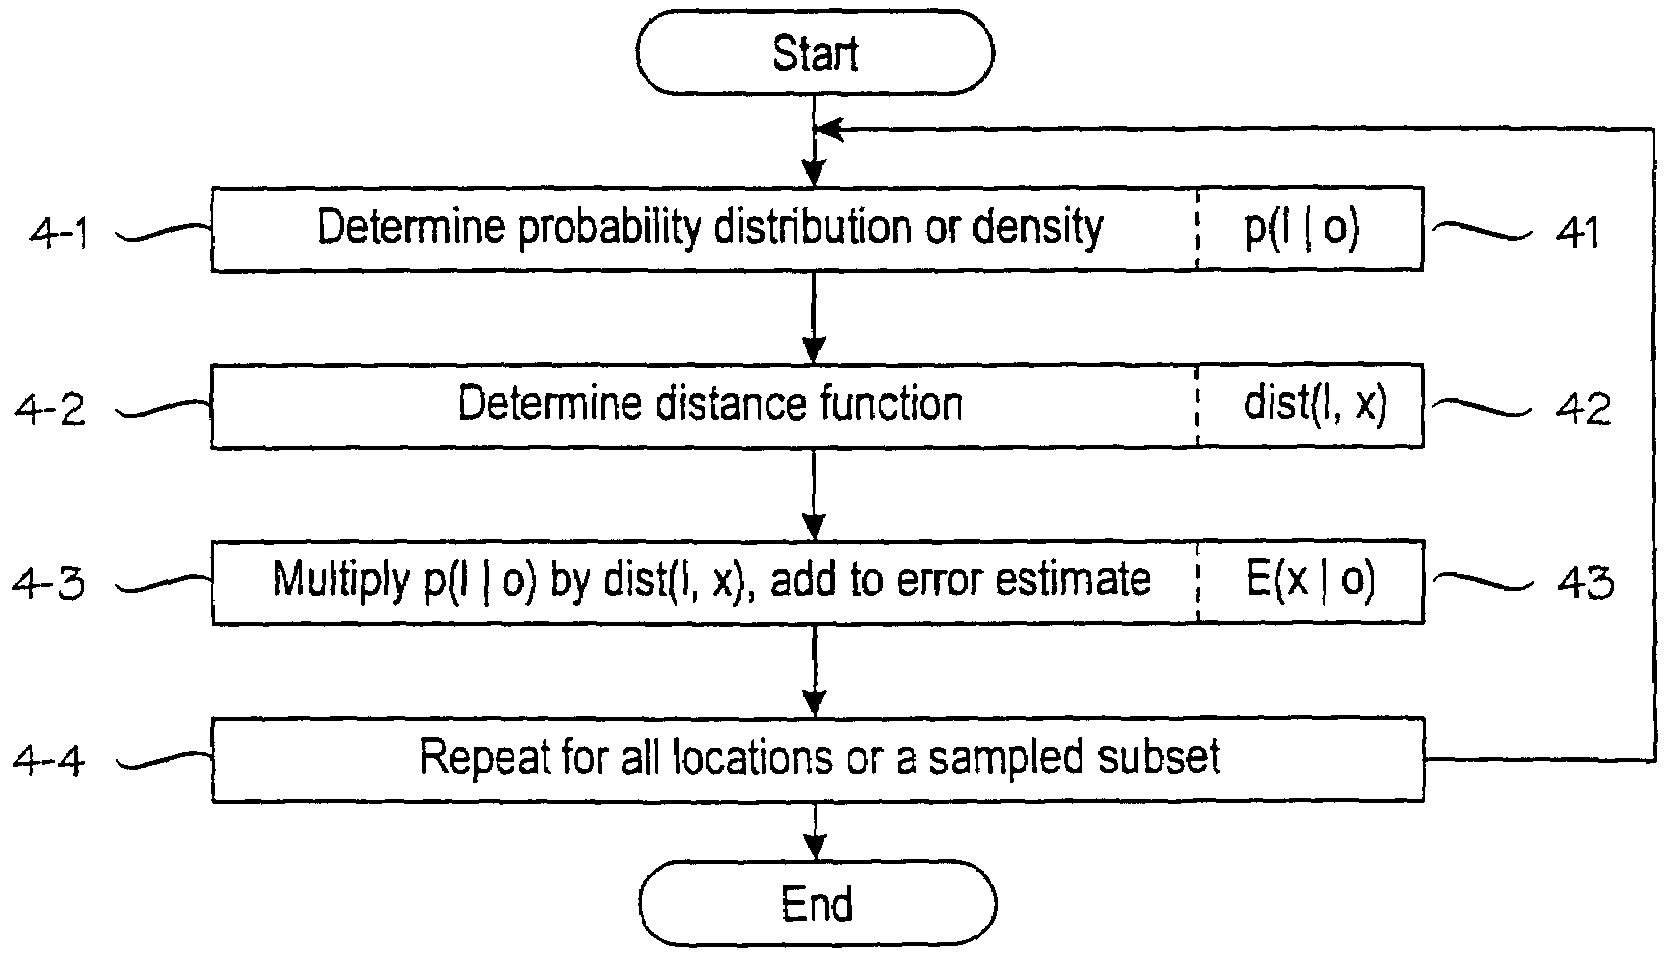 Error estimate concerning a target device's location operable to move in a wireless environment